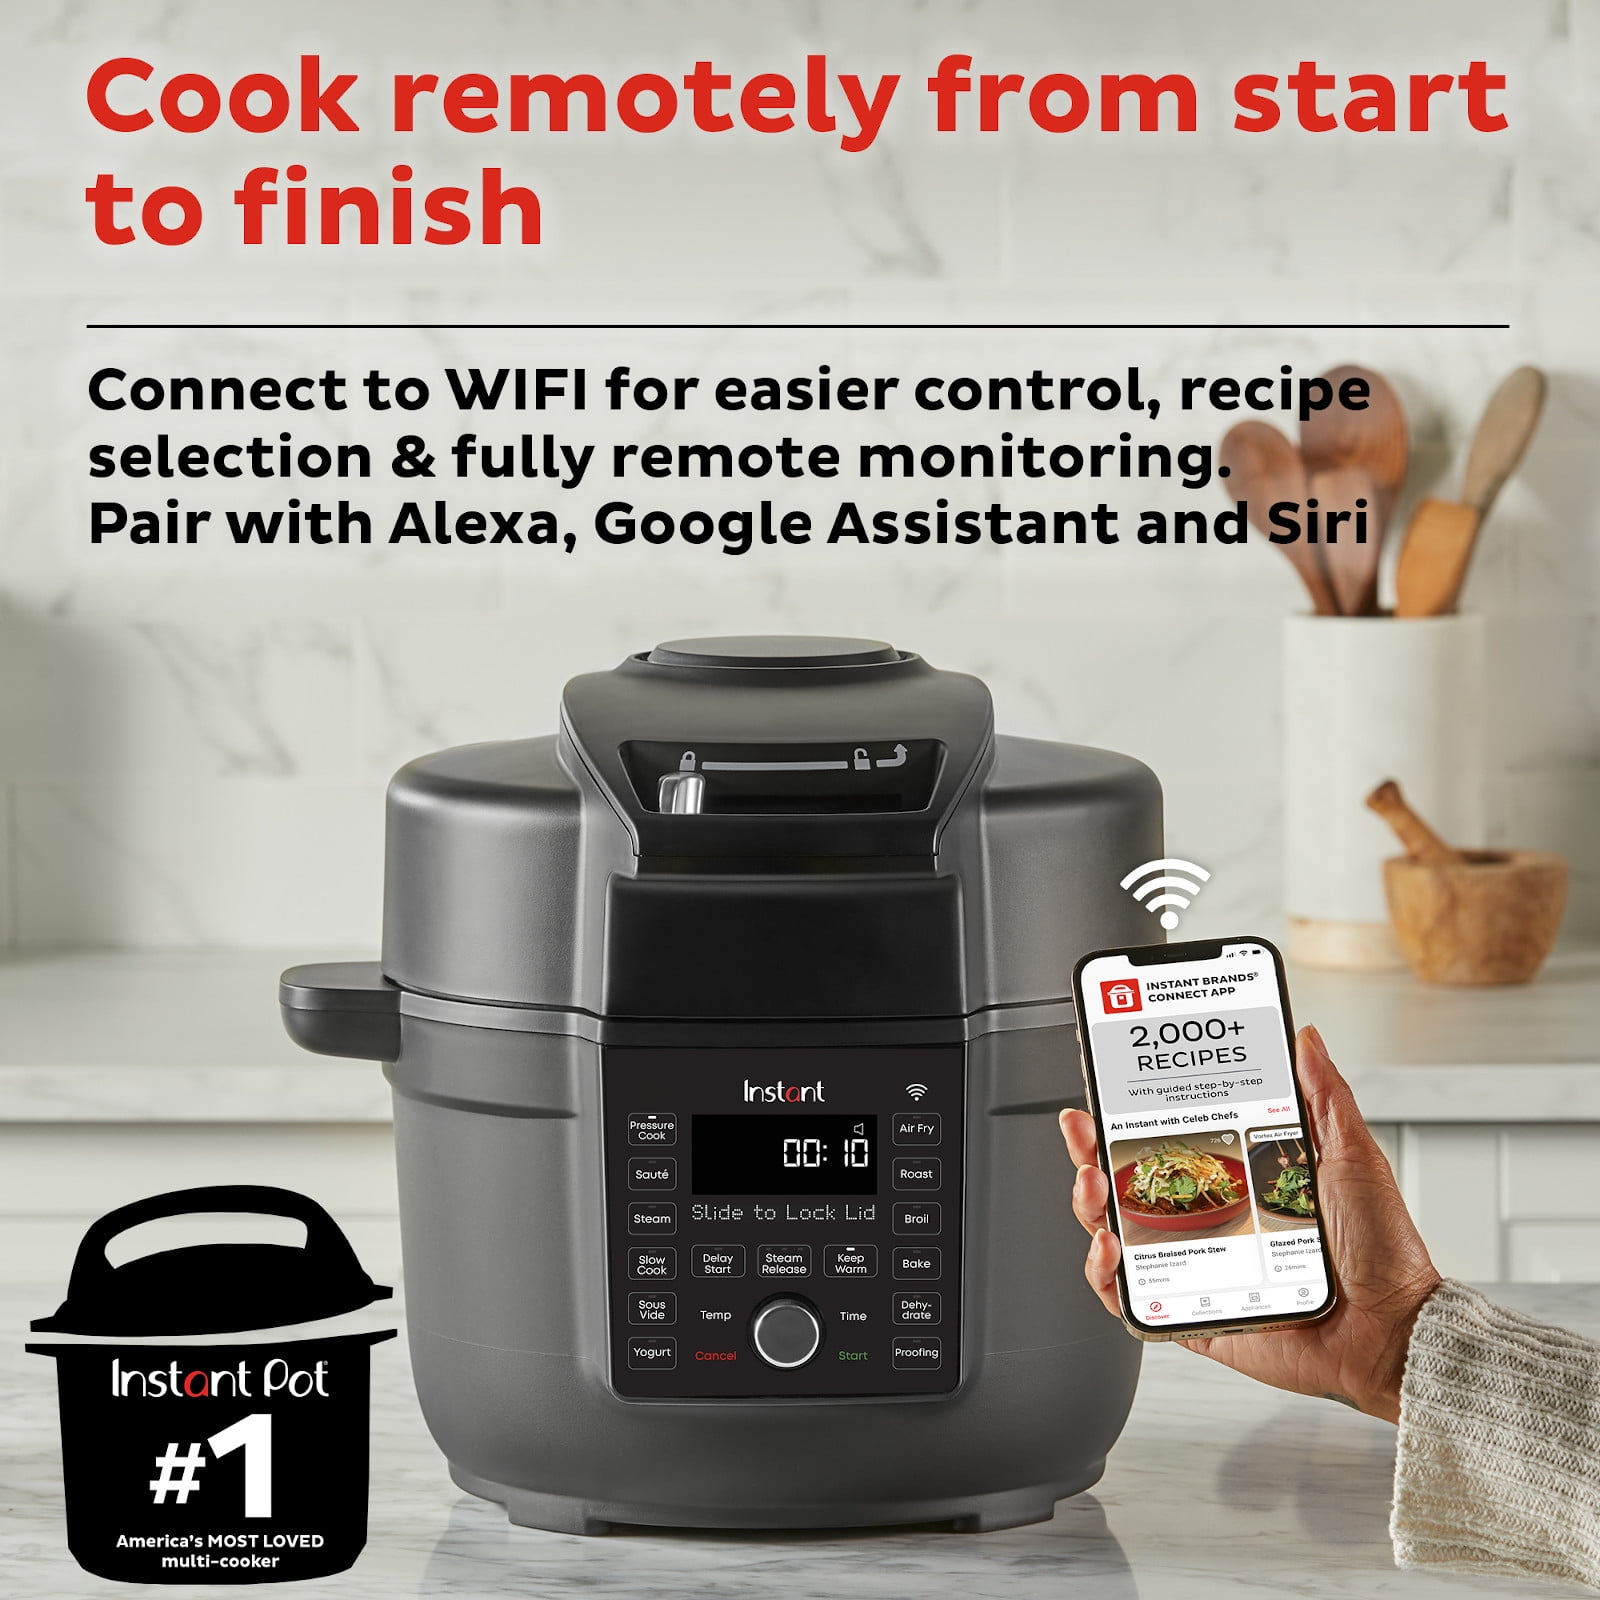 Instant Pot's Smart Wi-Fi and Alexa-enabled Cooker drops to $100